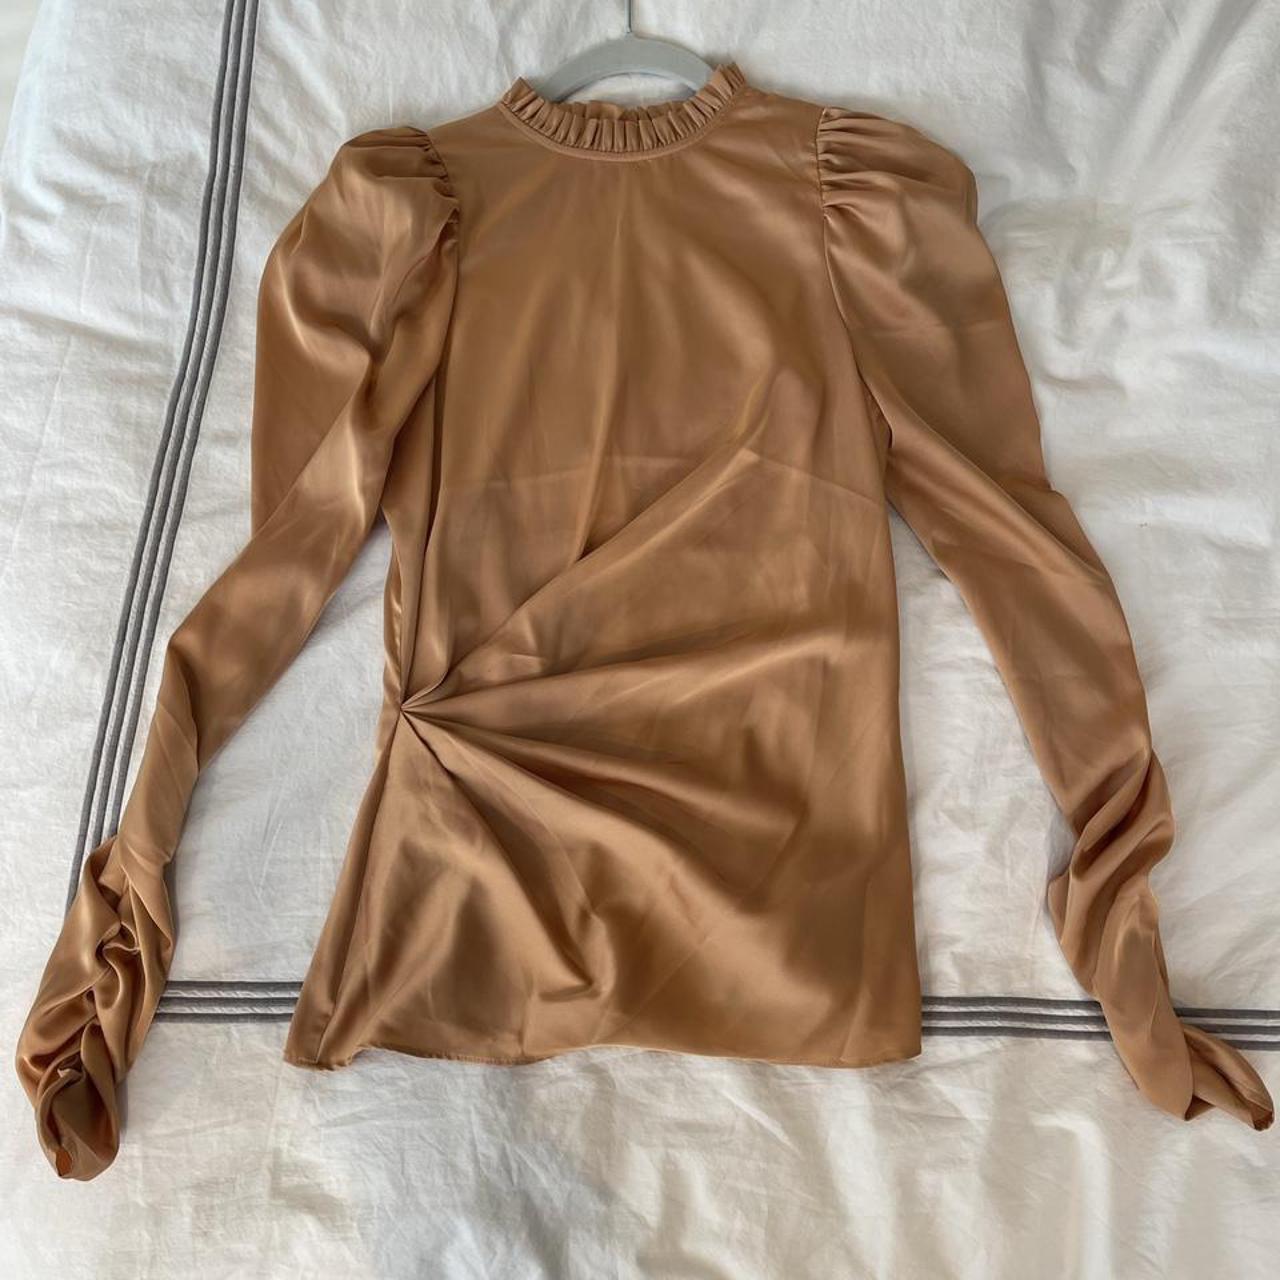 A.L.C Women's Gold and Tan Blouse (2)